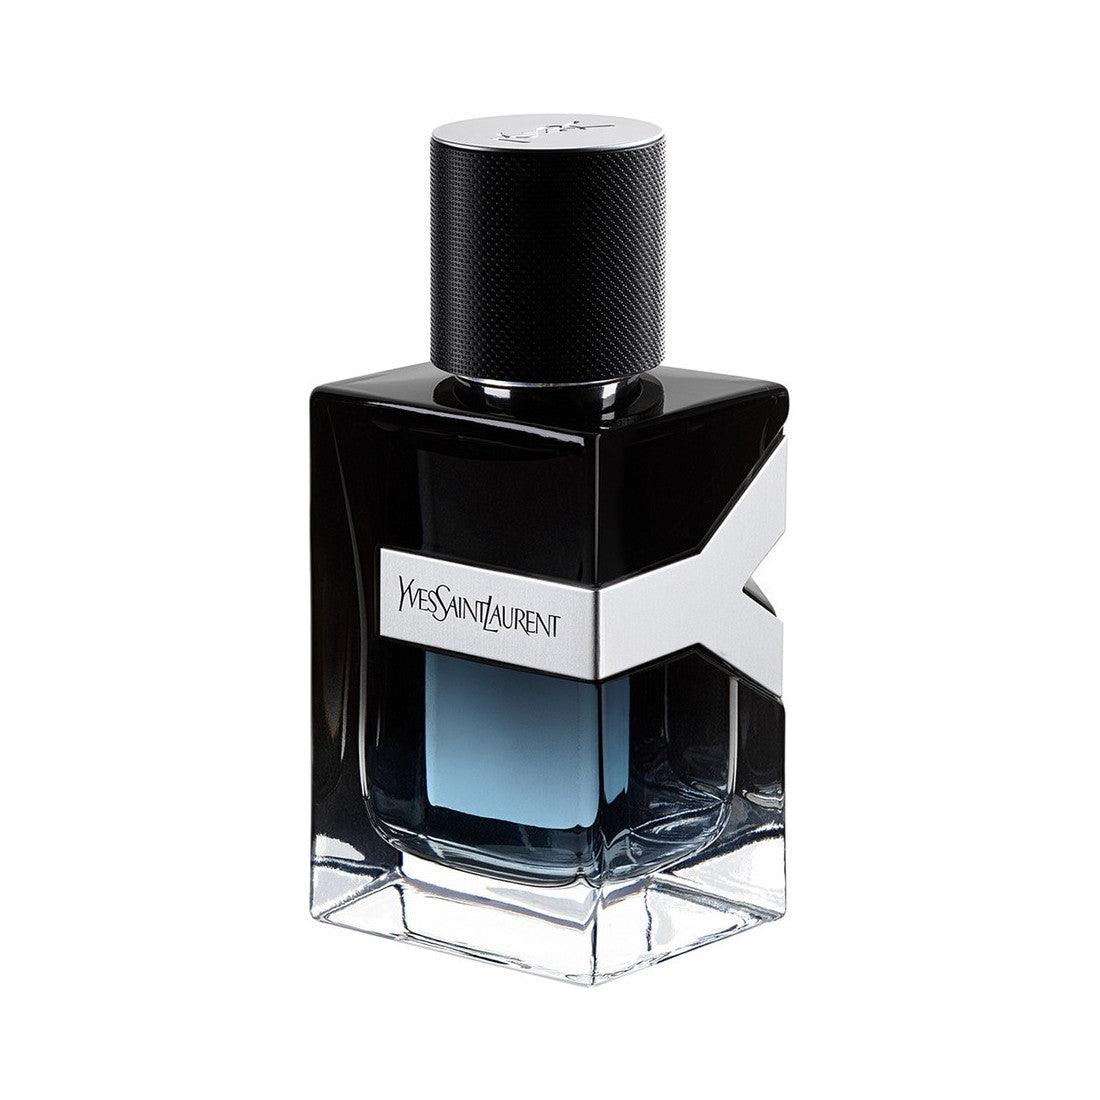 What are some of the best perfumes? - Quora